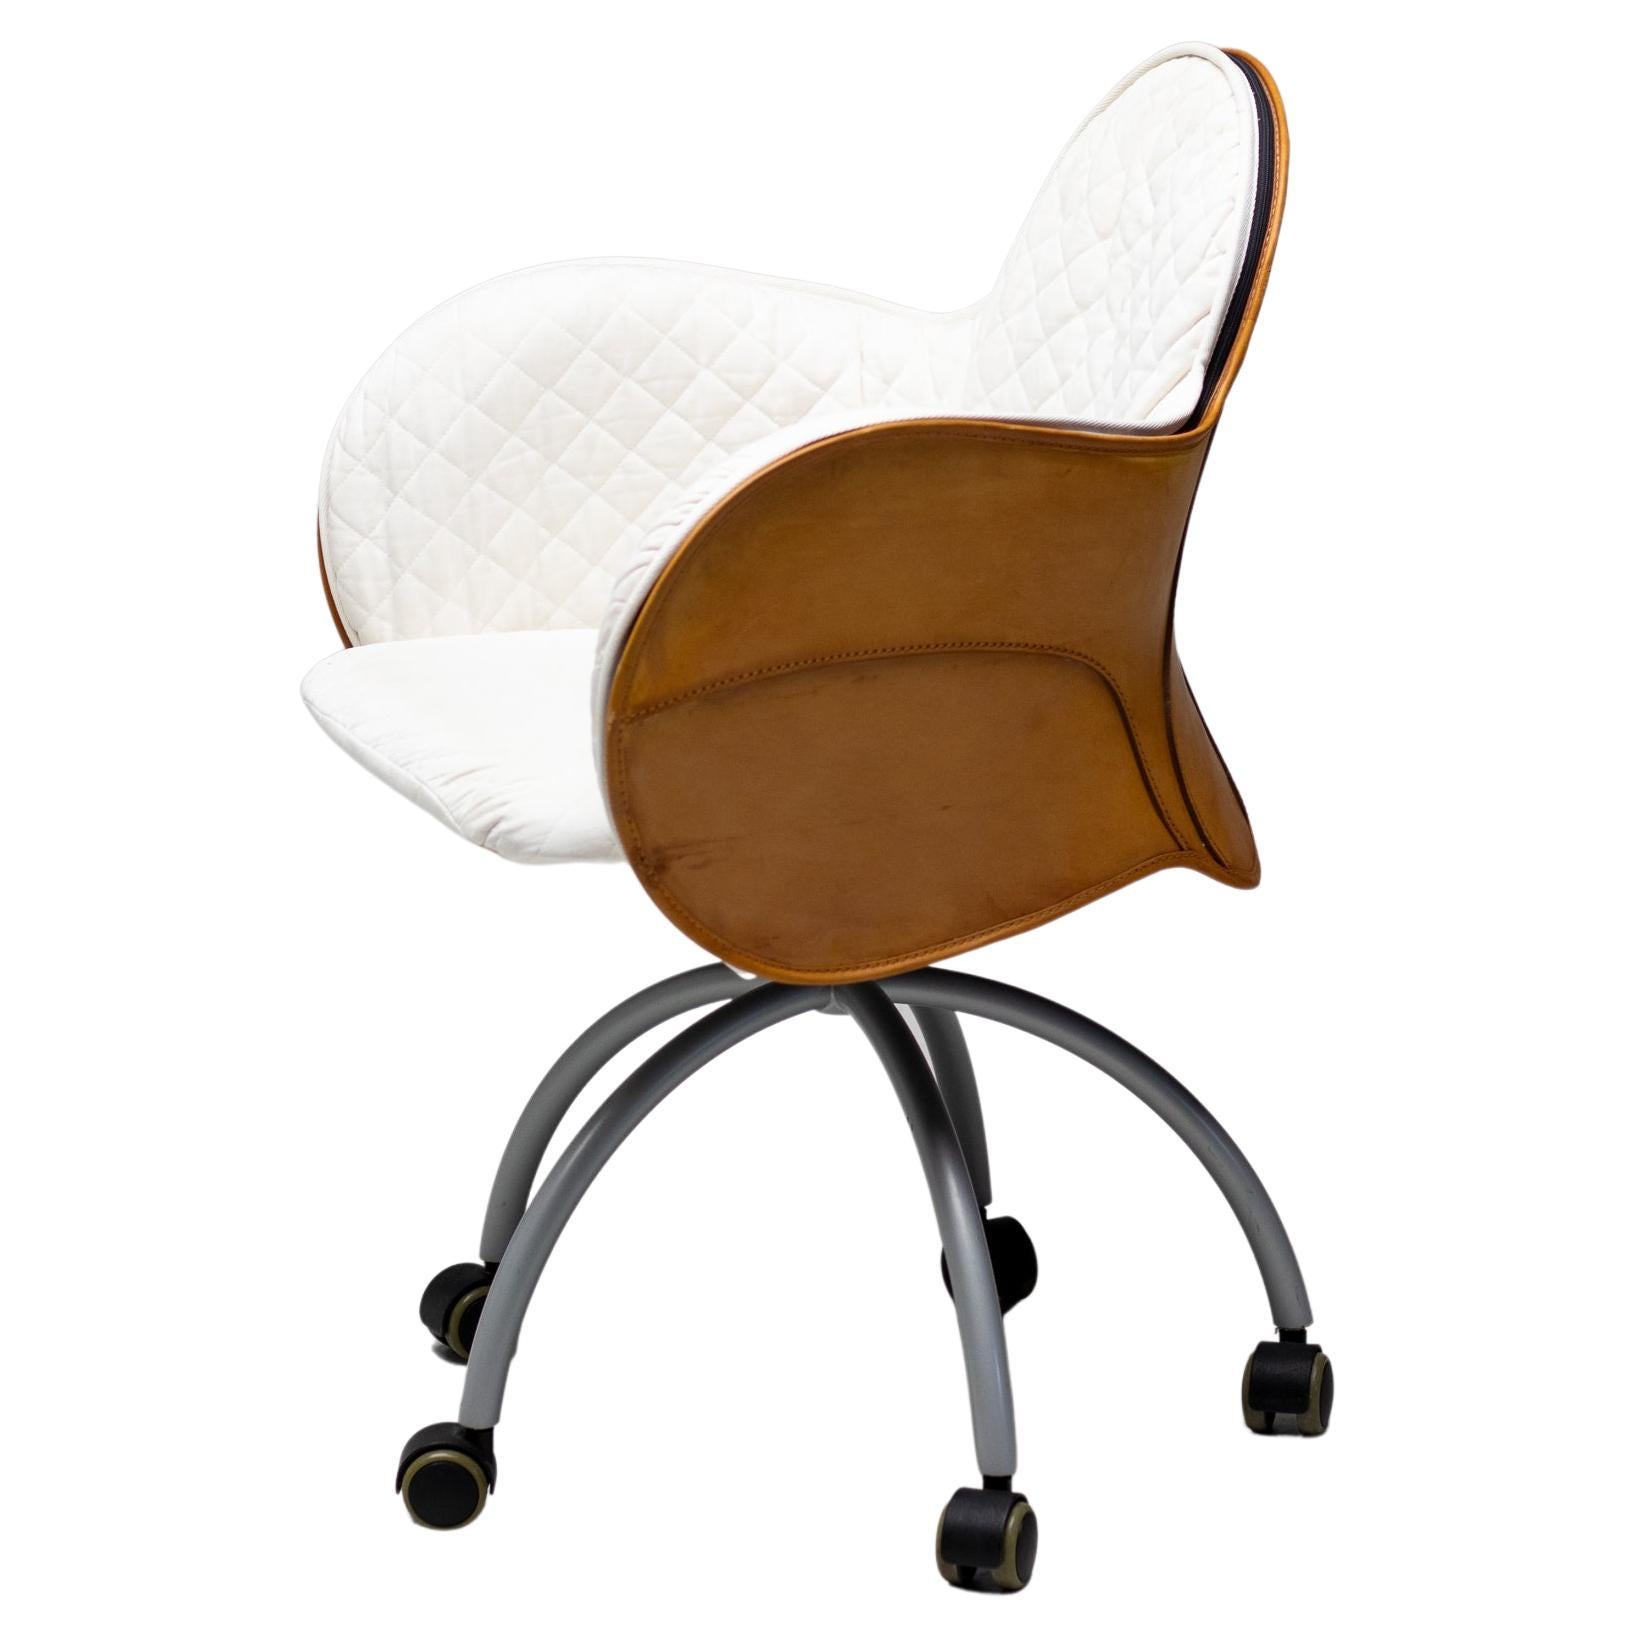 De Padova Incisa Chair in Saddle Leather For Sale